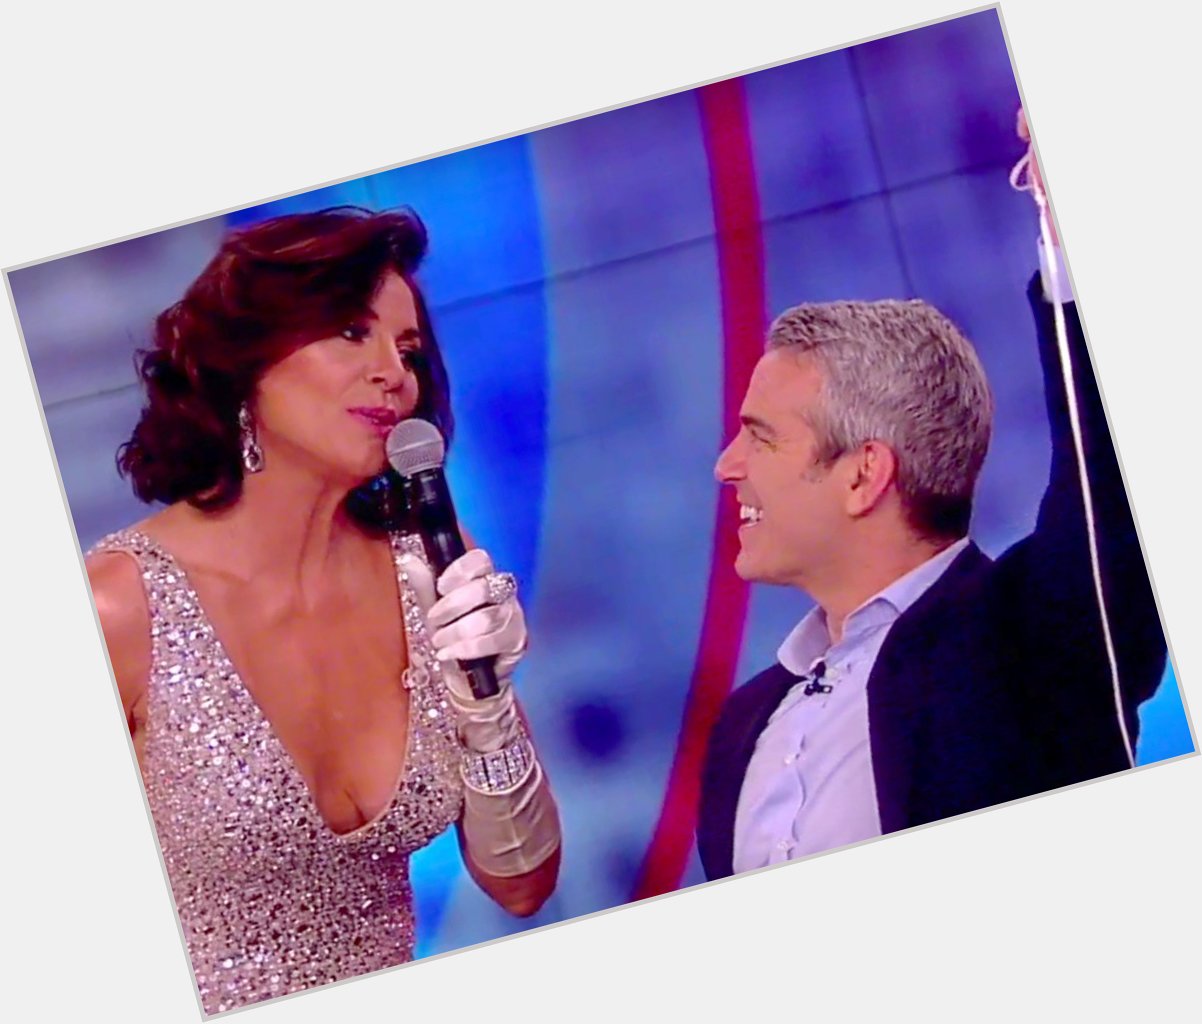 Luann de Lesseps Surprises Andy Cohen with Happy Birthday Serenade Ahead of 50th  